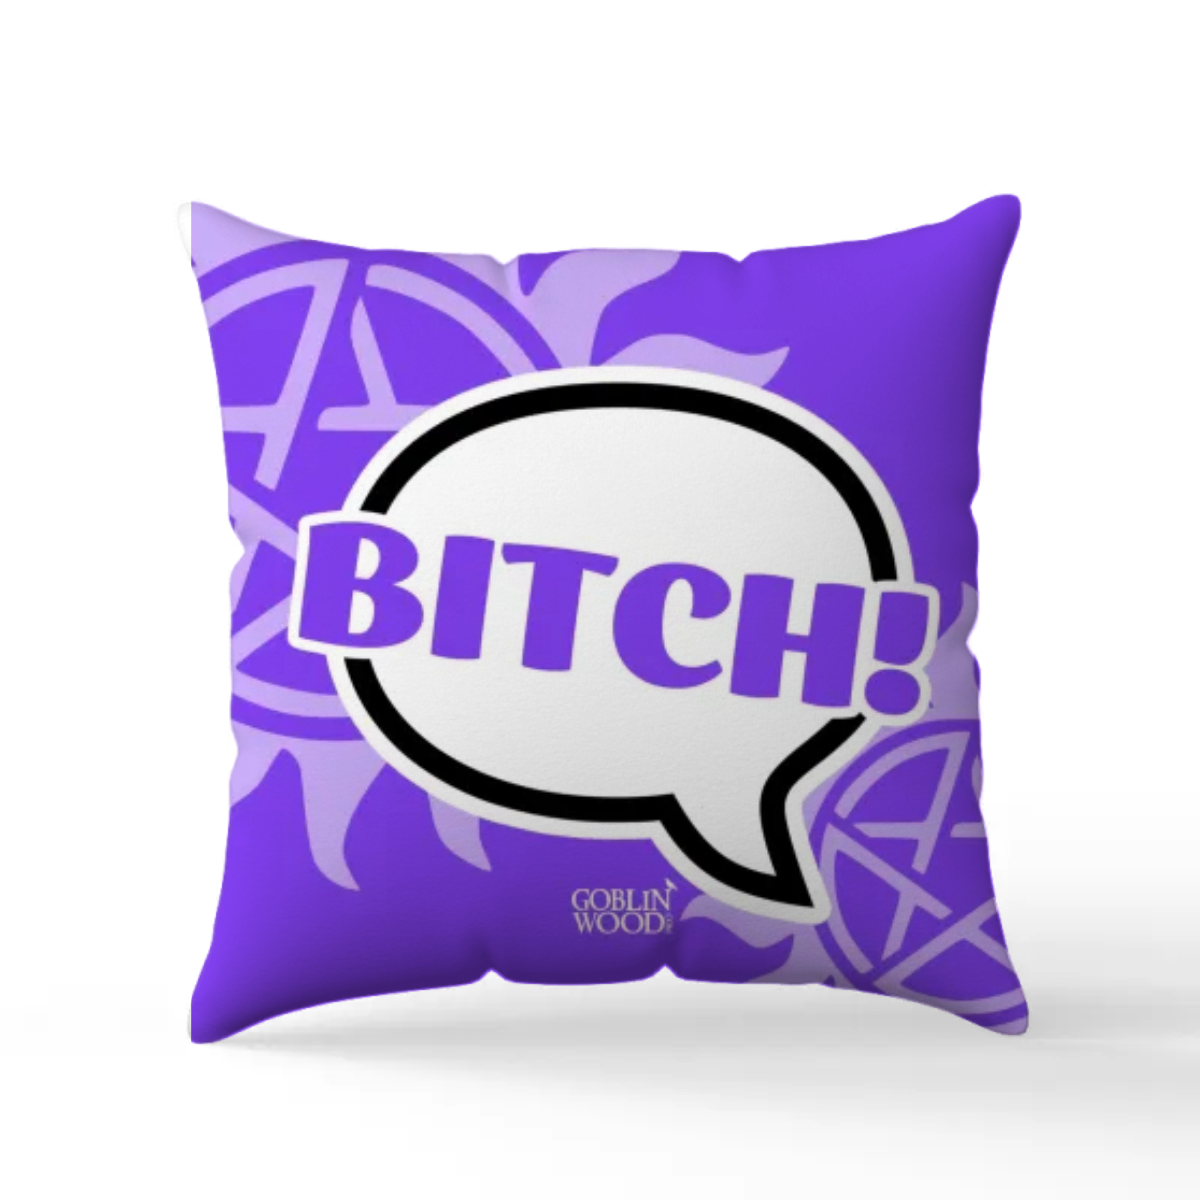 Bitch! Speech Bubble Scatter Cushion - Supernatural Inspired - Goblin Wood Exclusive